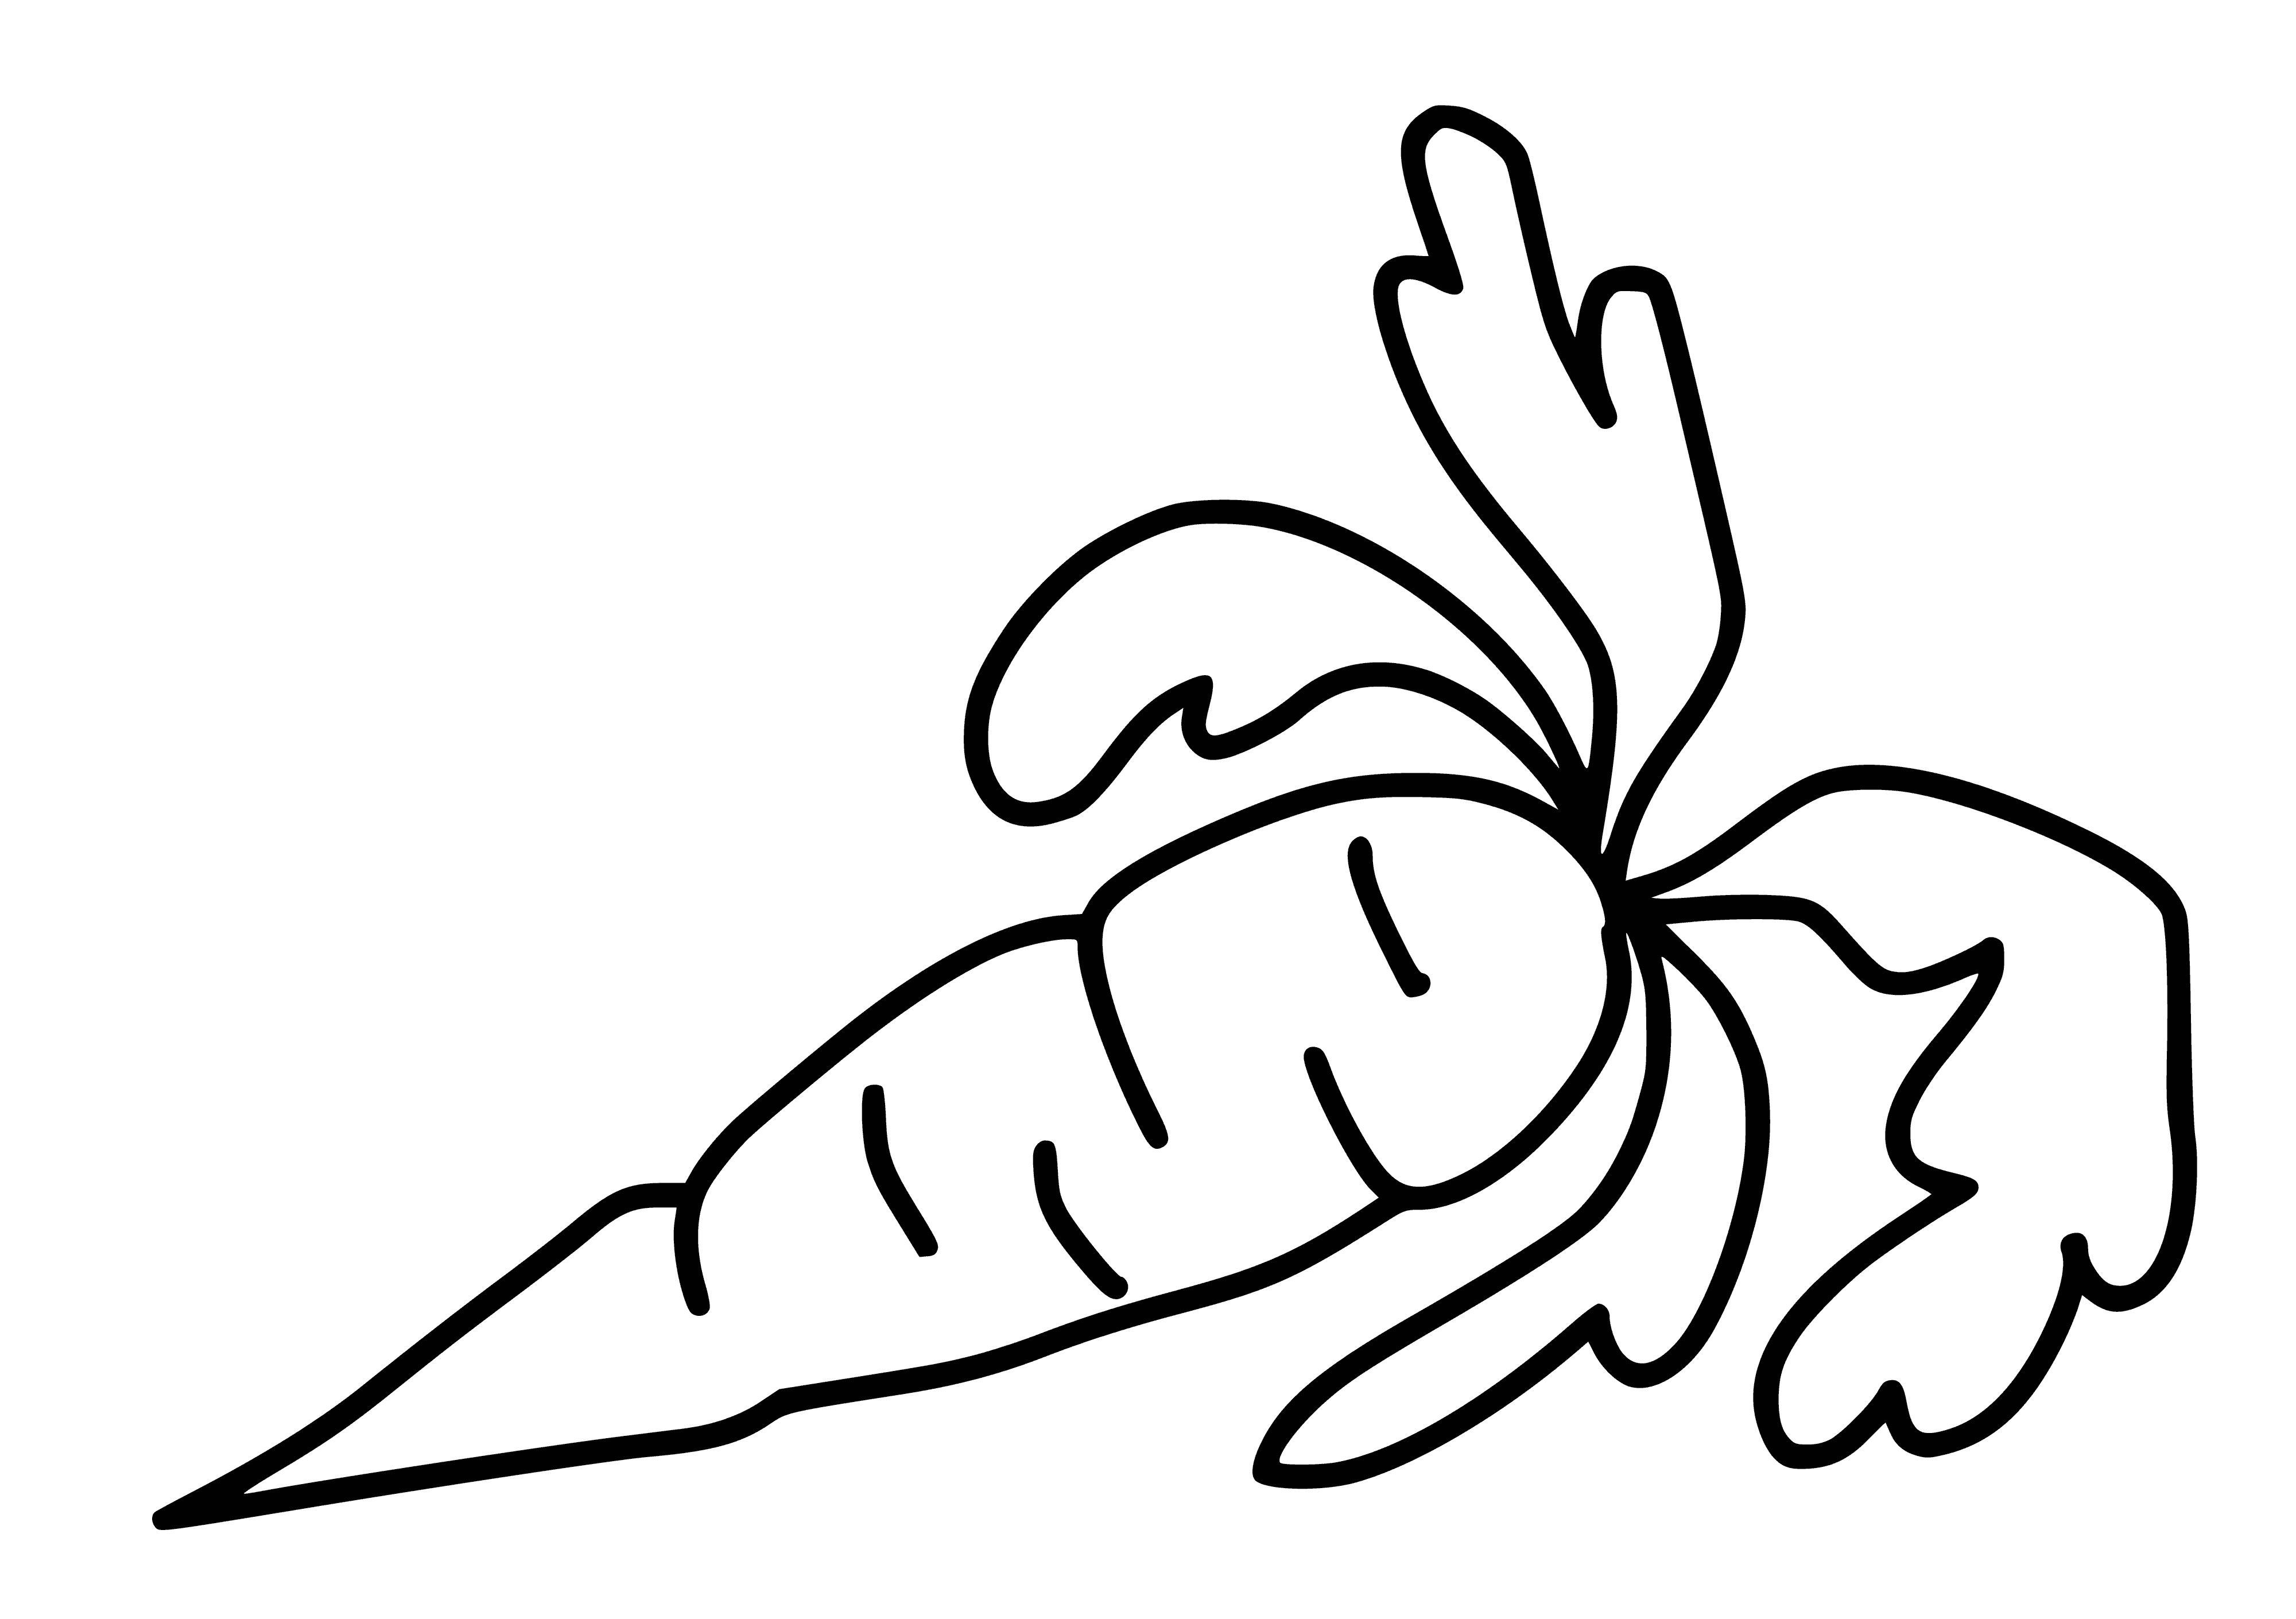 coloring page: Half a carrot cut lengthwise: orange inside & out, tiny green leaf on top.